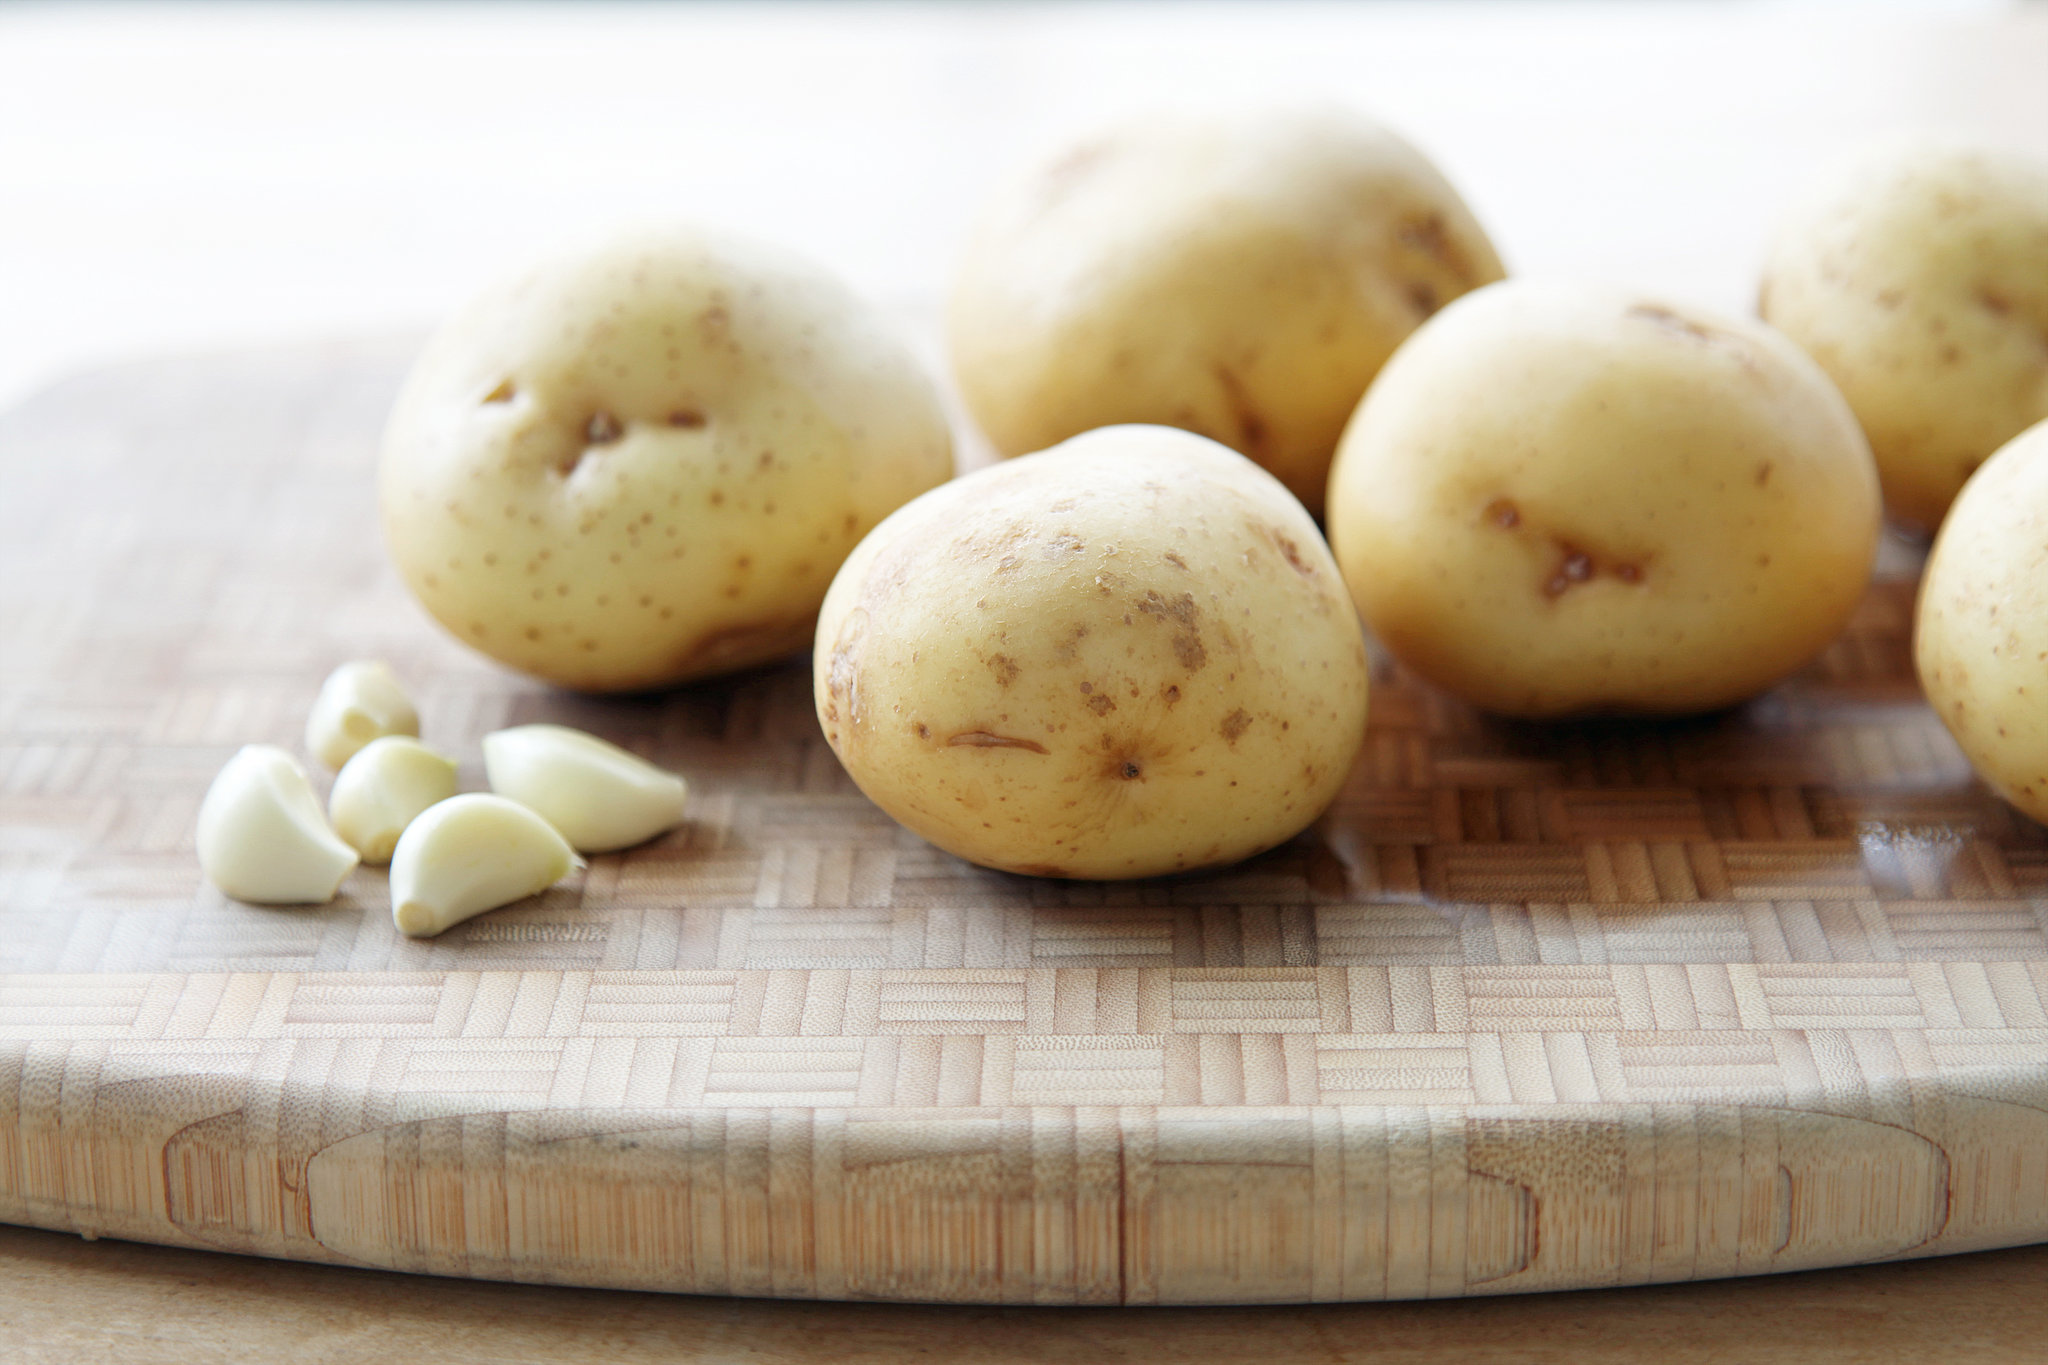 Ina Garten's mashed potatoes recipe for Thanksgiving: prepping the potatoes